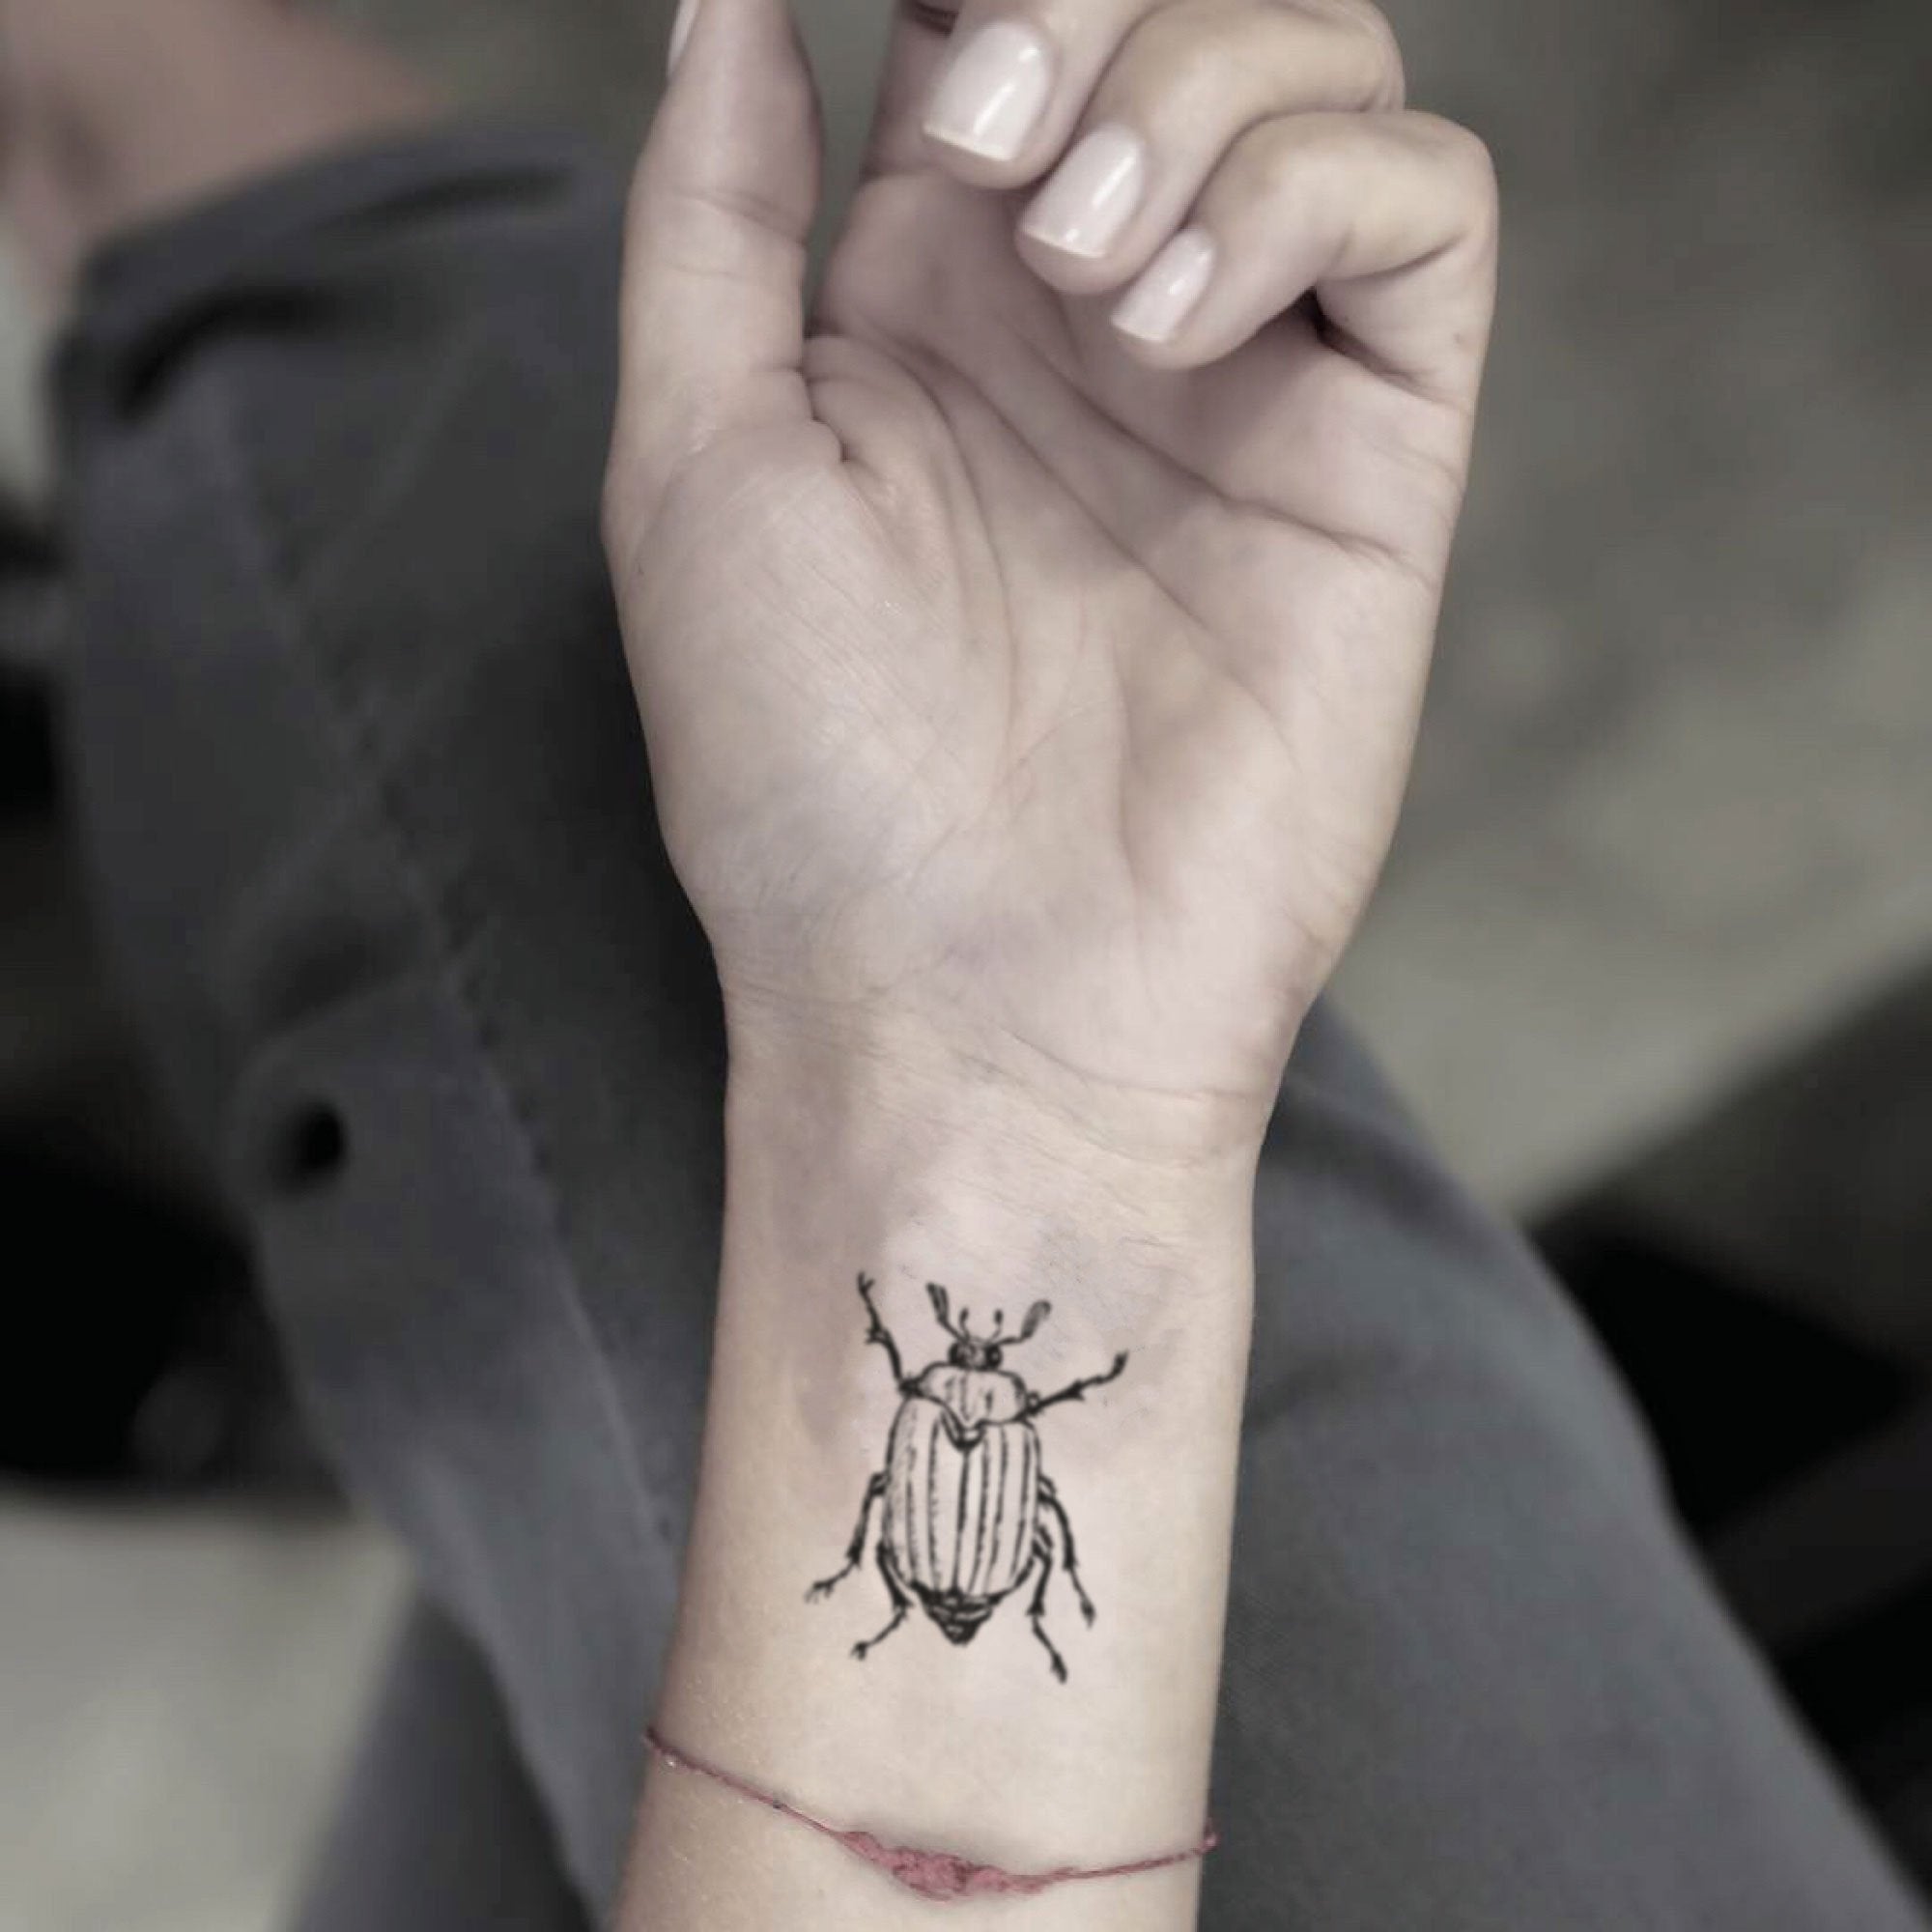 Diego C. Avellar (@insectx_tattoo) • Instagram photos and videos